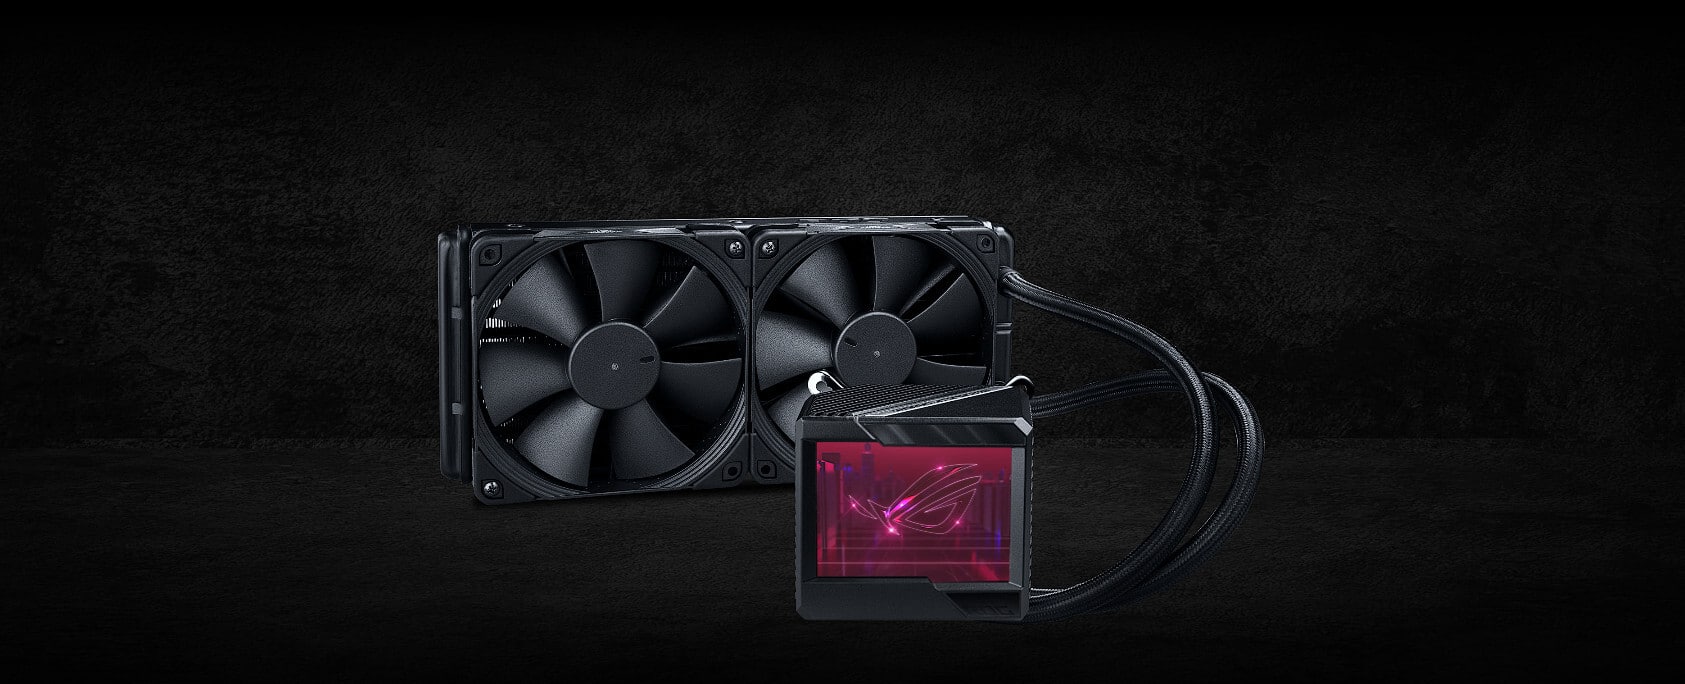 ASUS ROG Ryujin II 240 All-In-One Liquid CPU Cooler with Customisable LCD Display